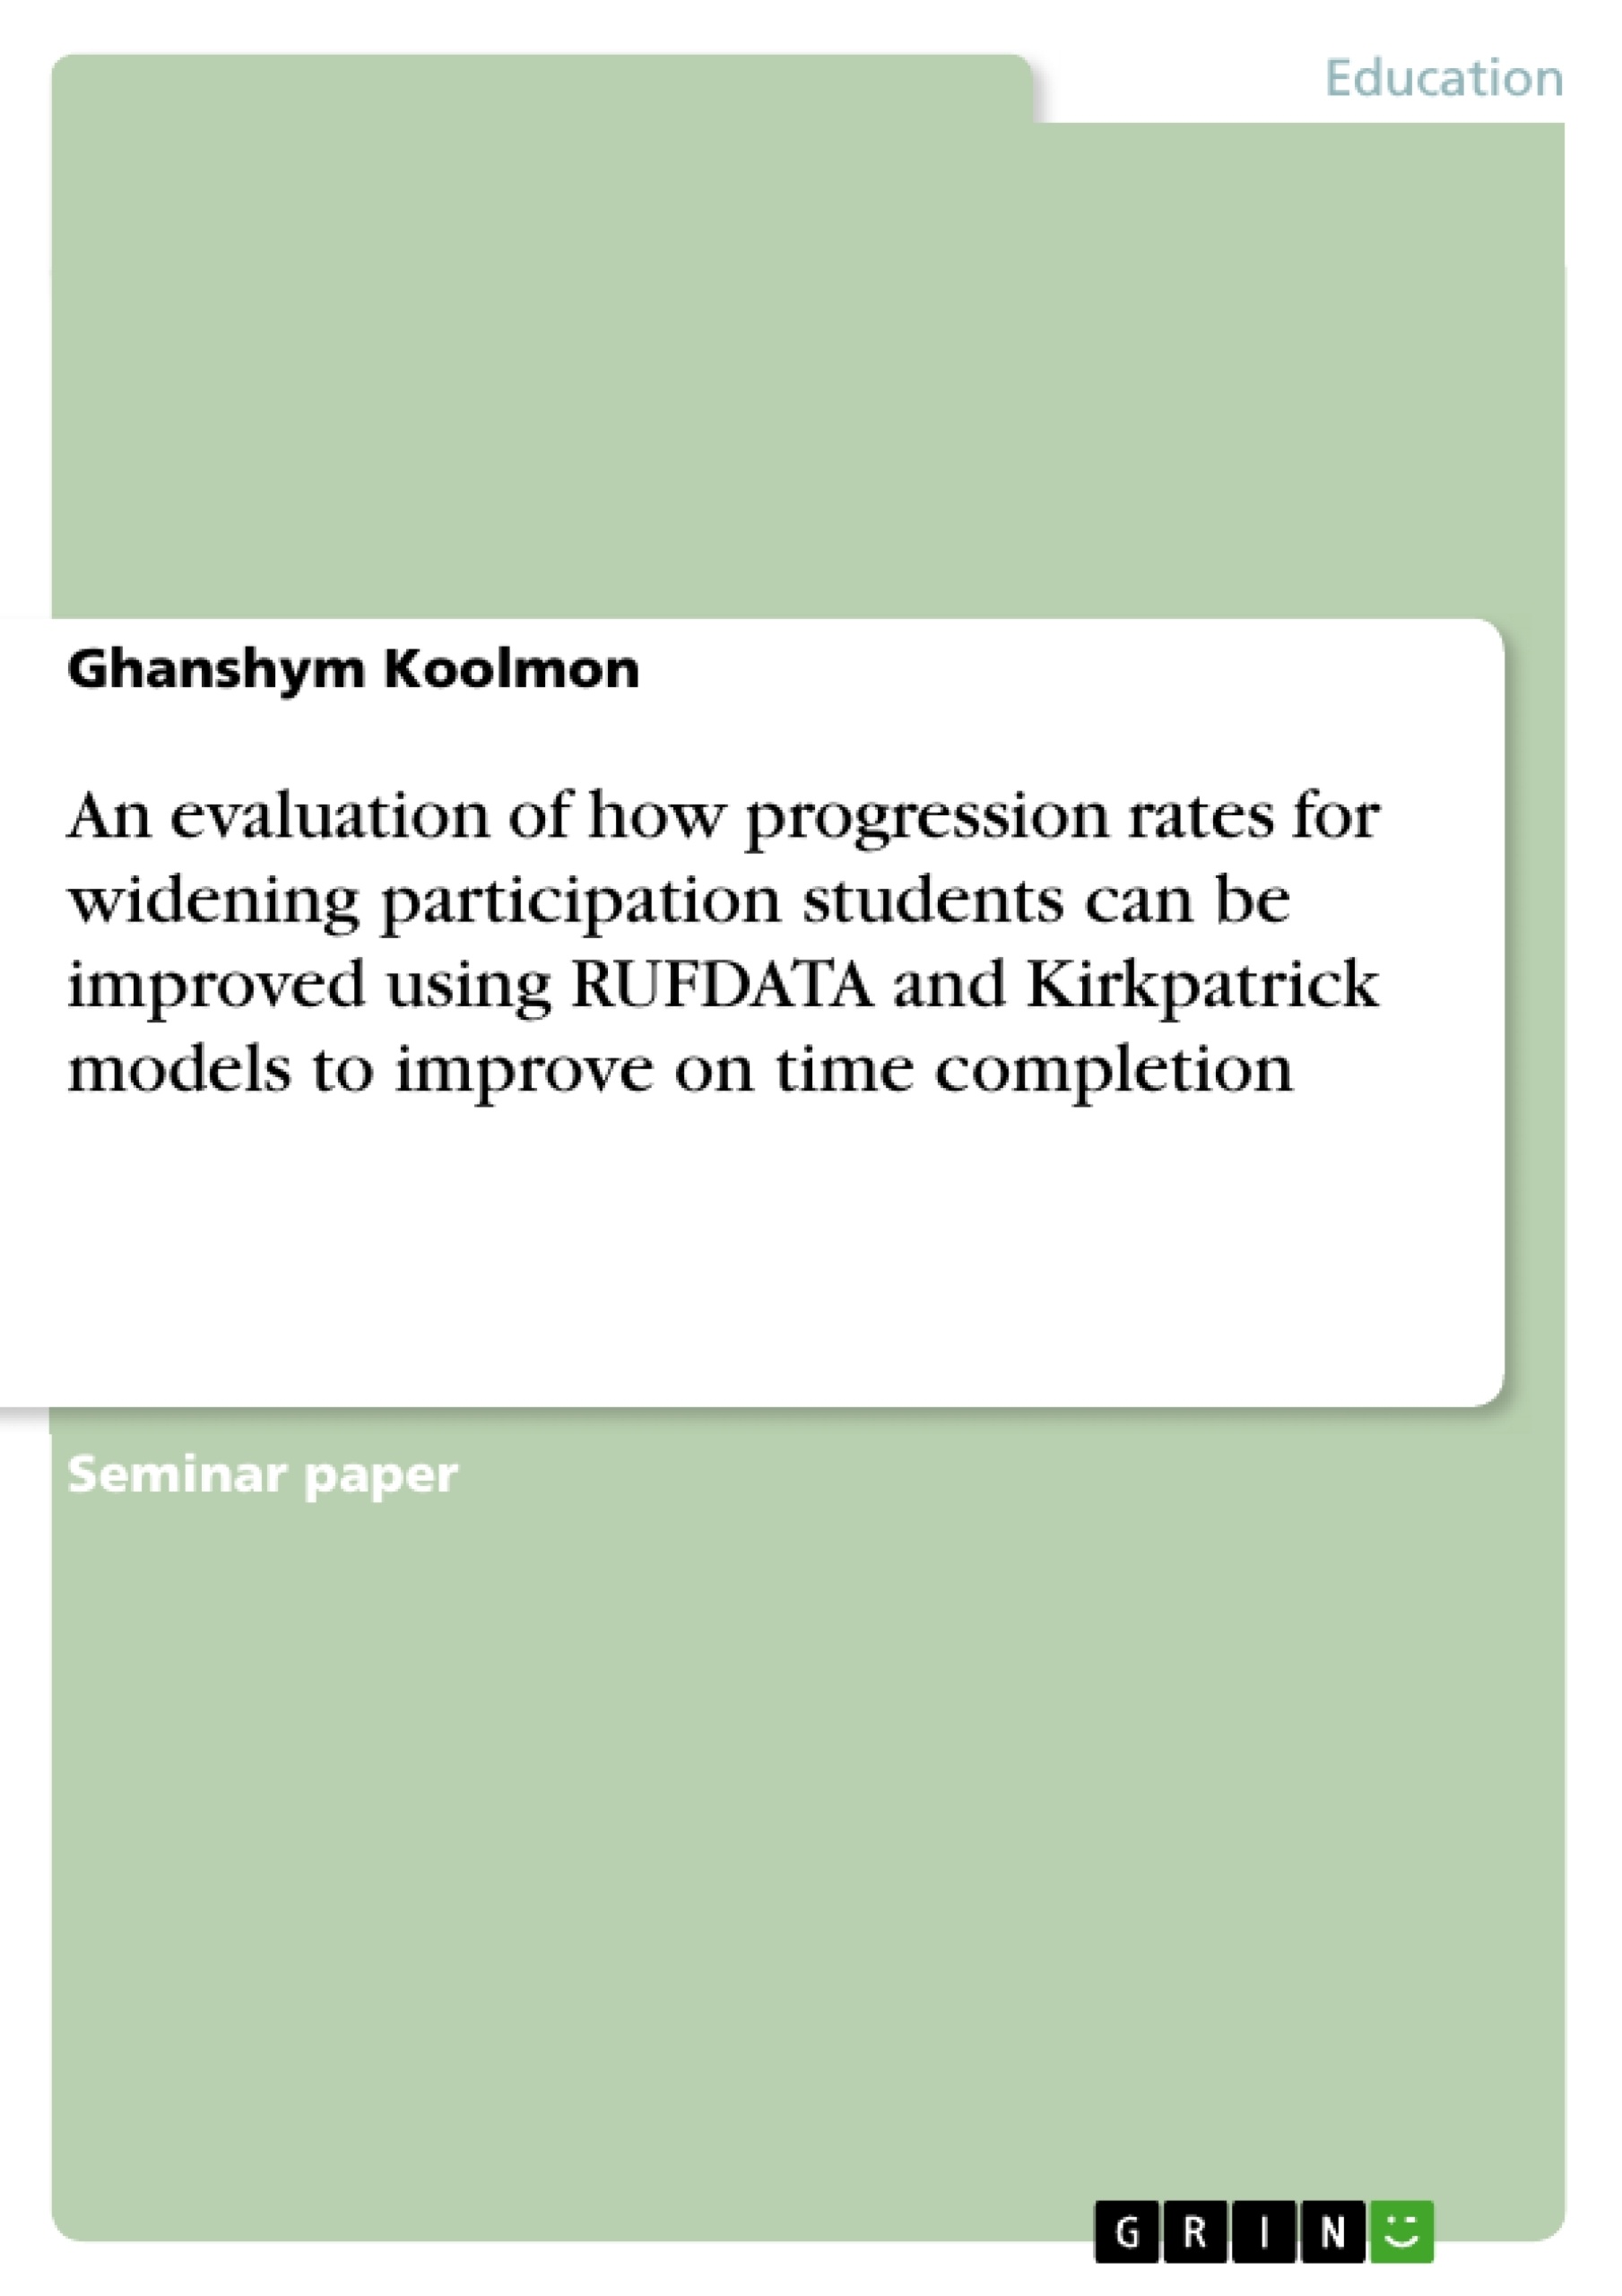 Title: An evaluation of how progression rates for widening participation students can be improved using RUFDATA and Kirkpatrick models to improve on time completion